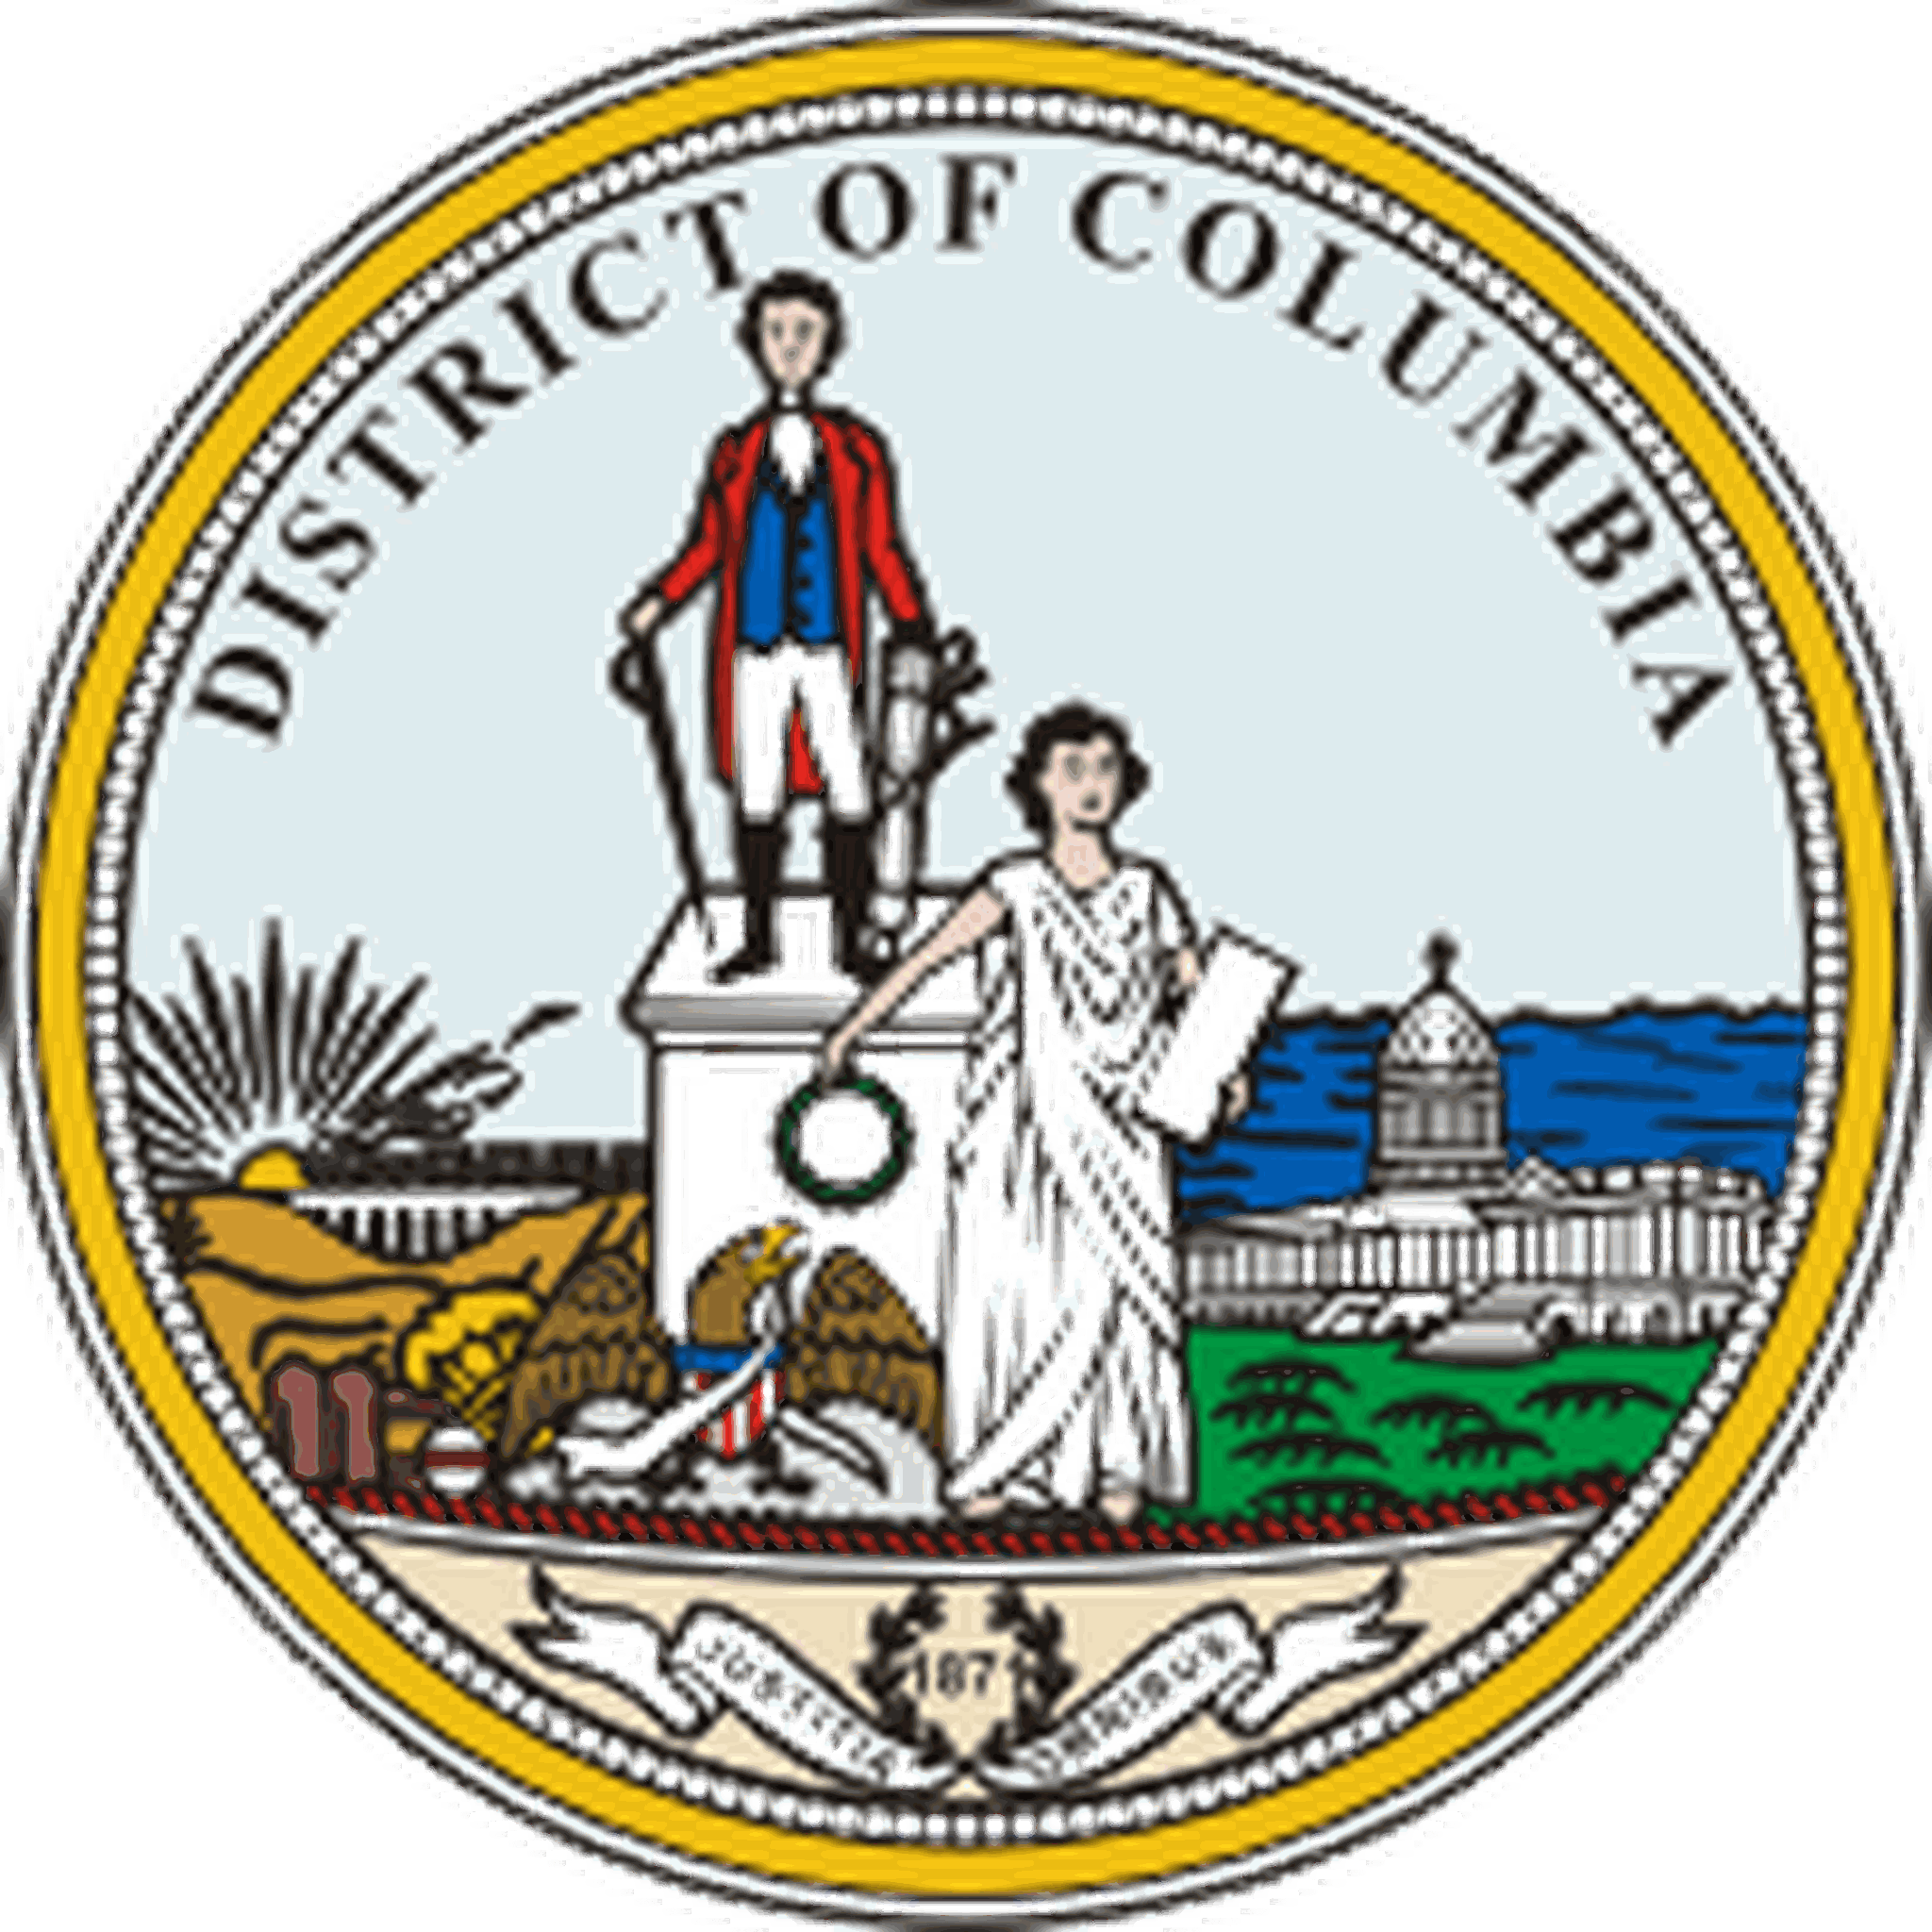 Appeals Court Overturns Conviction Of 'georgetown Cuddler' - Washington Dc State Seal (2048x2048)